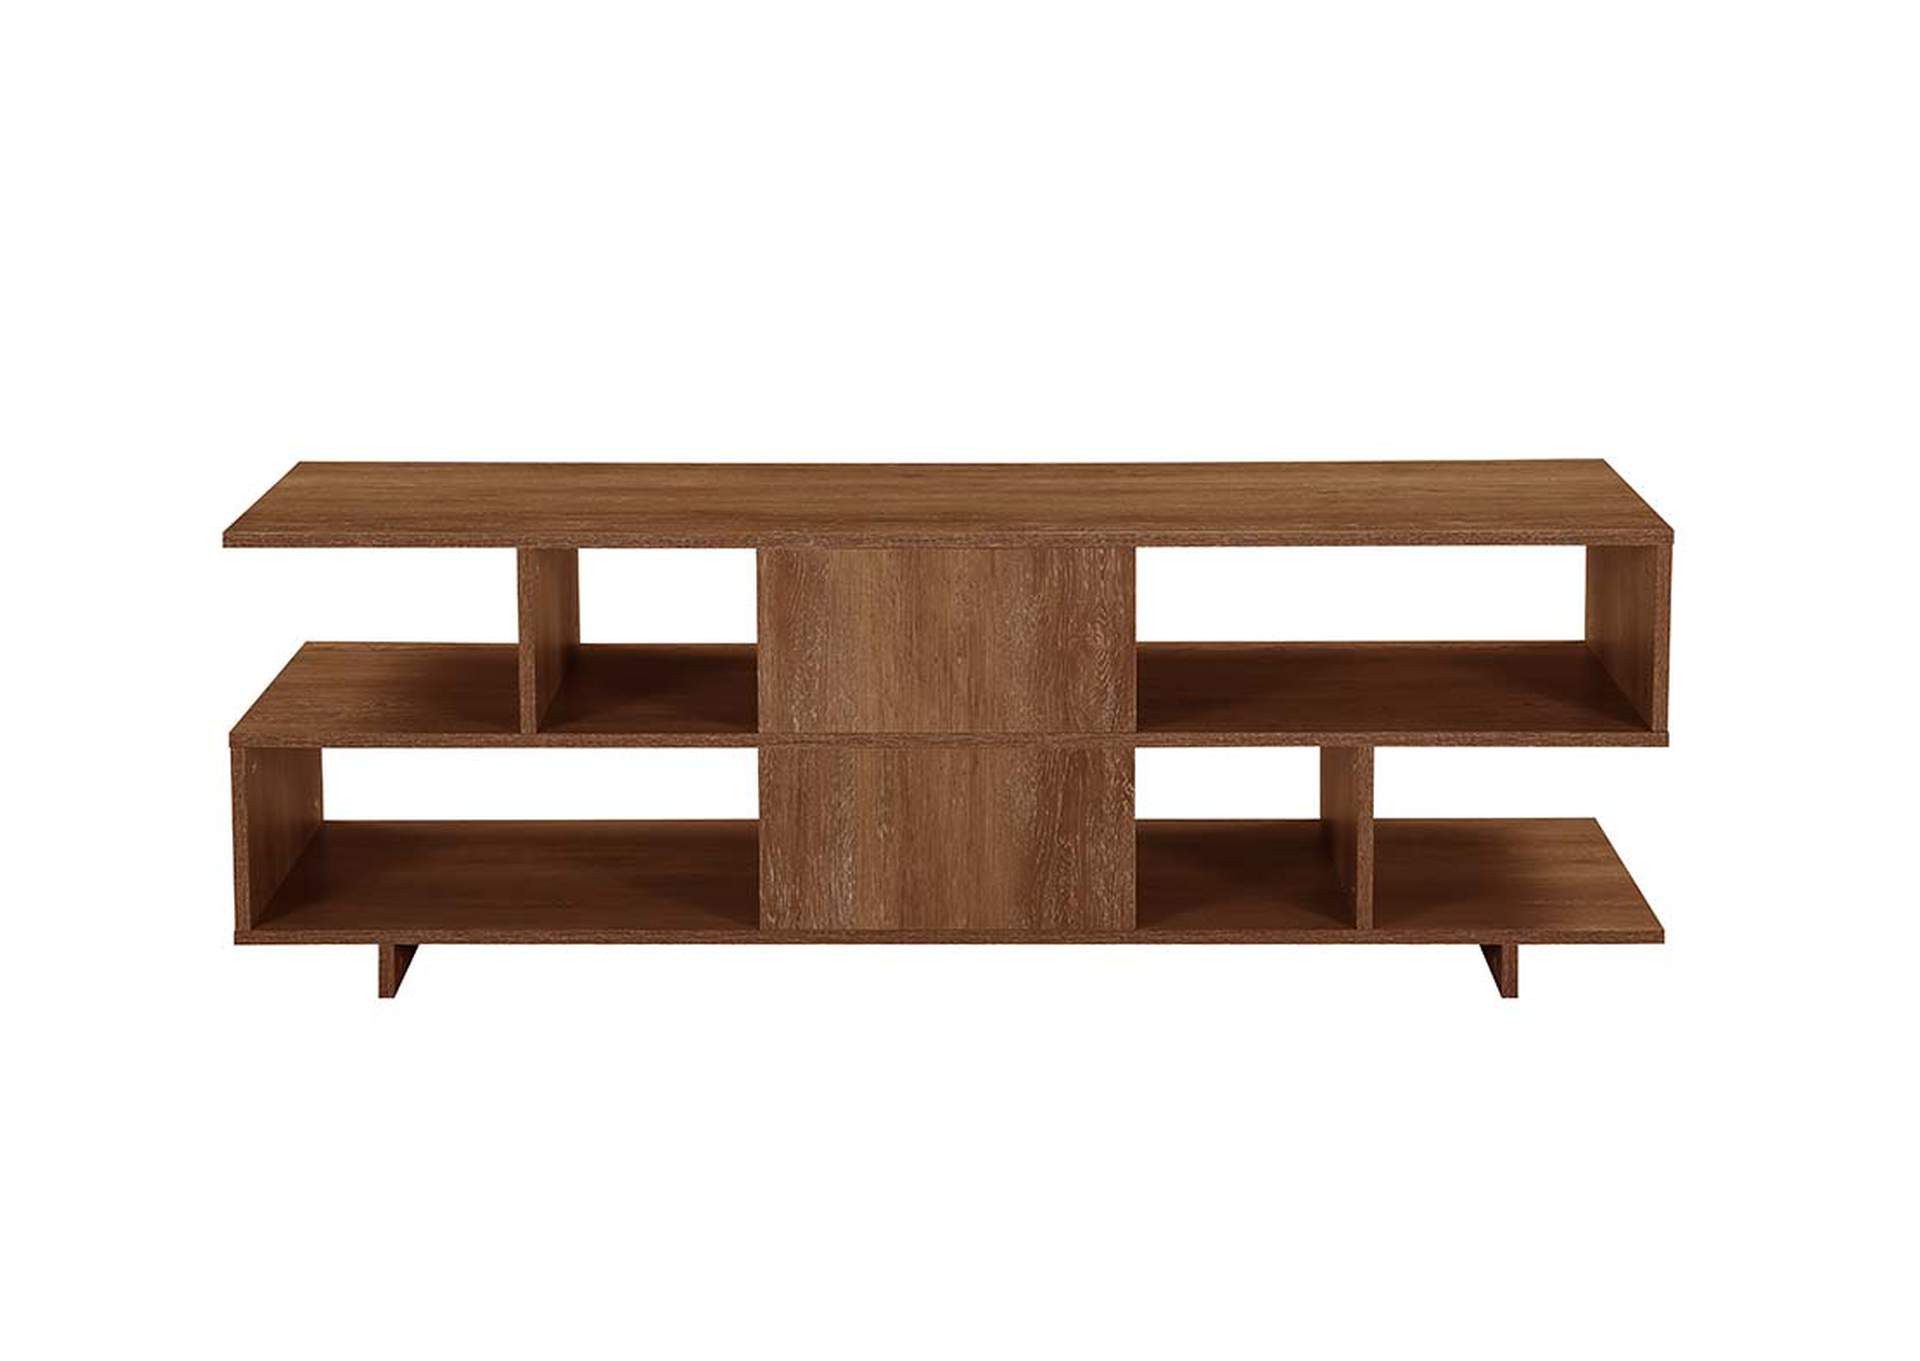 Abhay Tv Stand,Acme